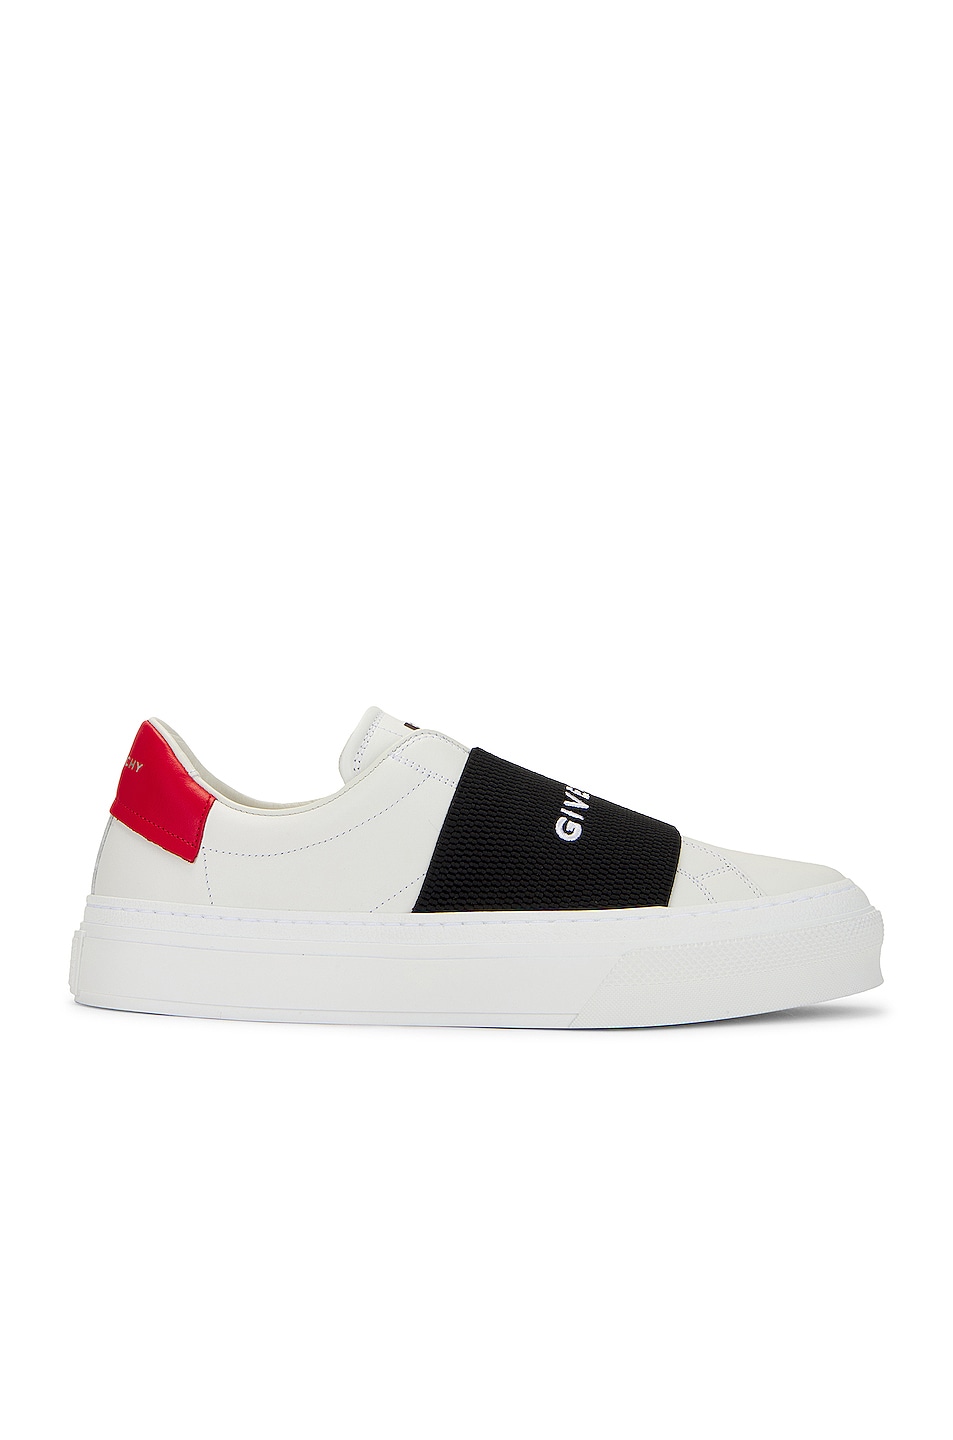 Image 1 of Givenchy Elastic City Sport Sneaker Elastic in White, Red & Black